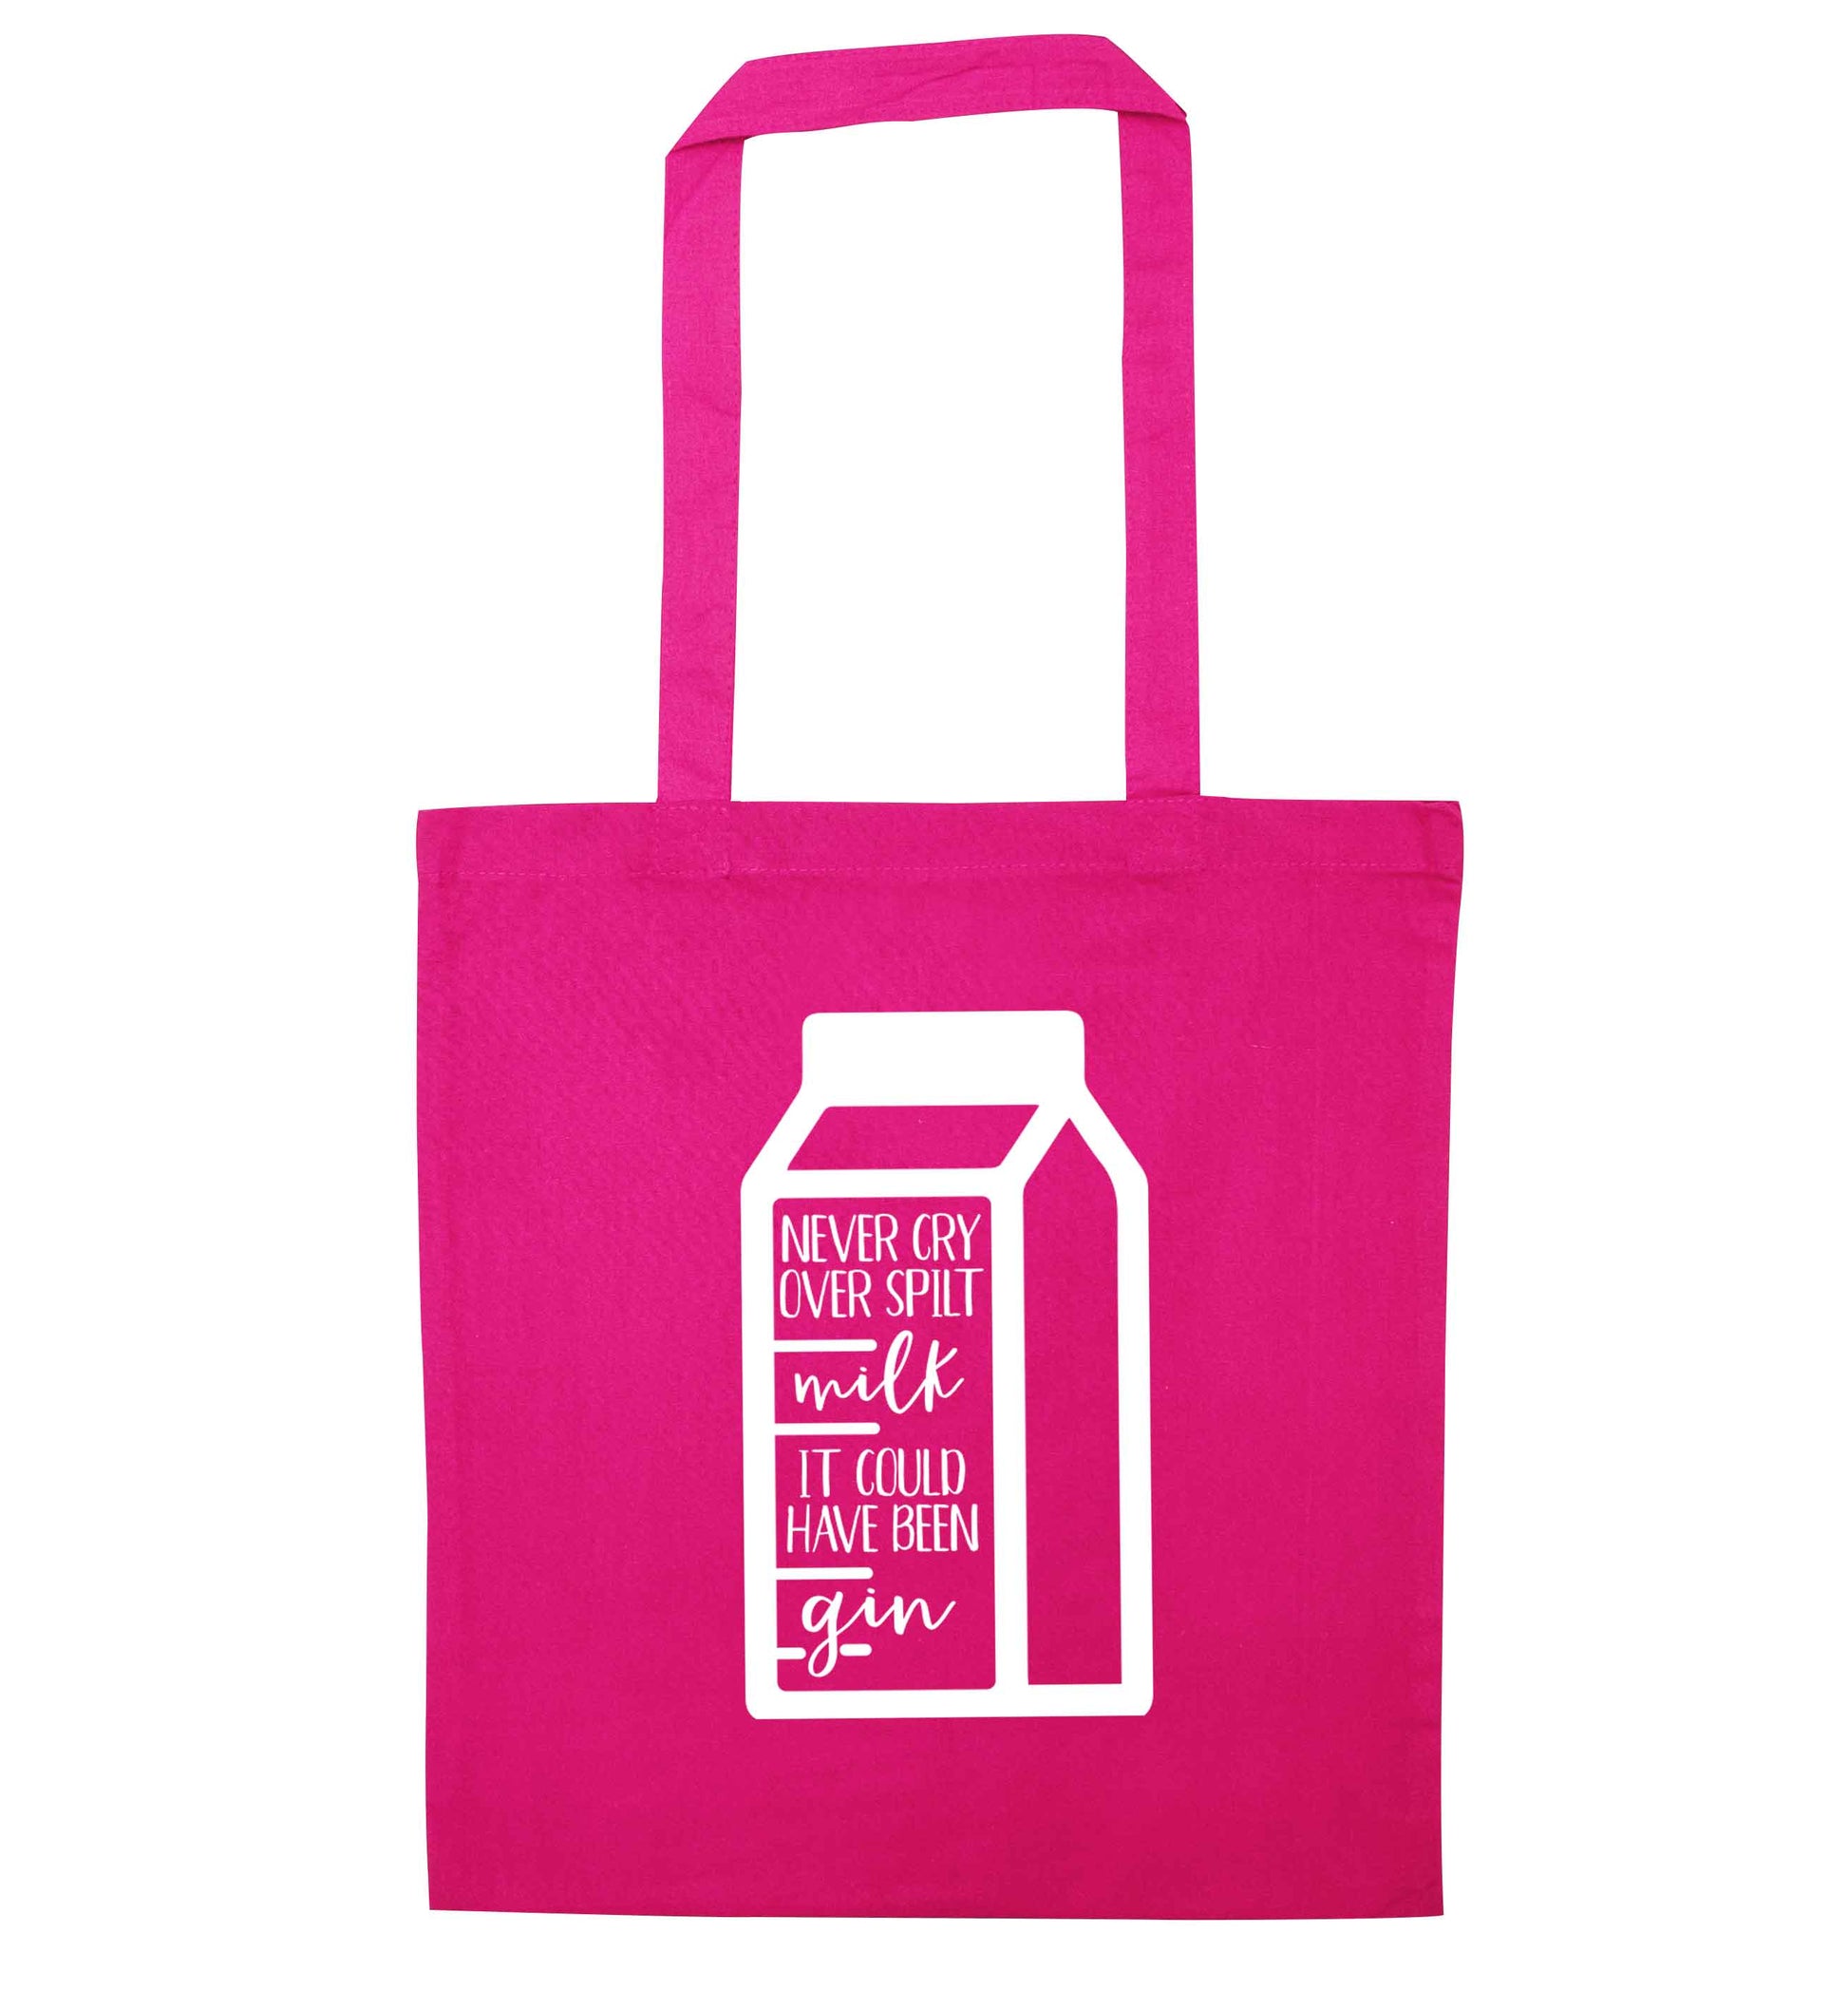 Never cry over spilt milk, it could have been gin pink tote bag